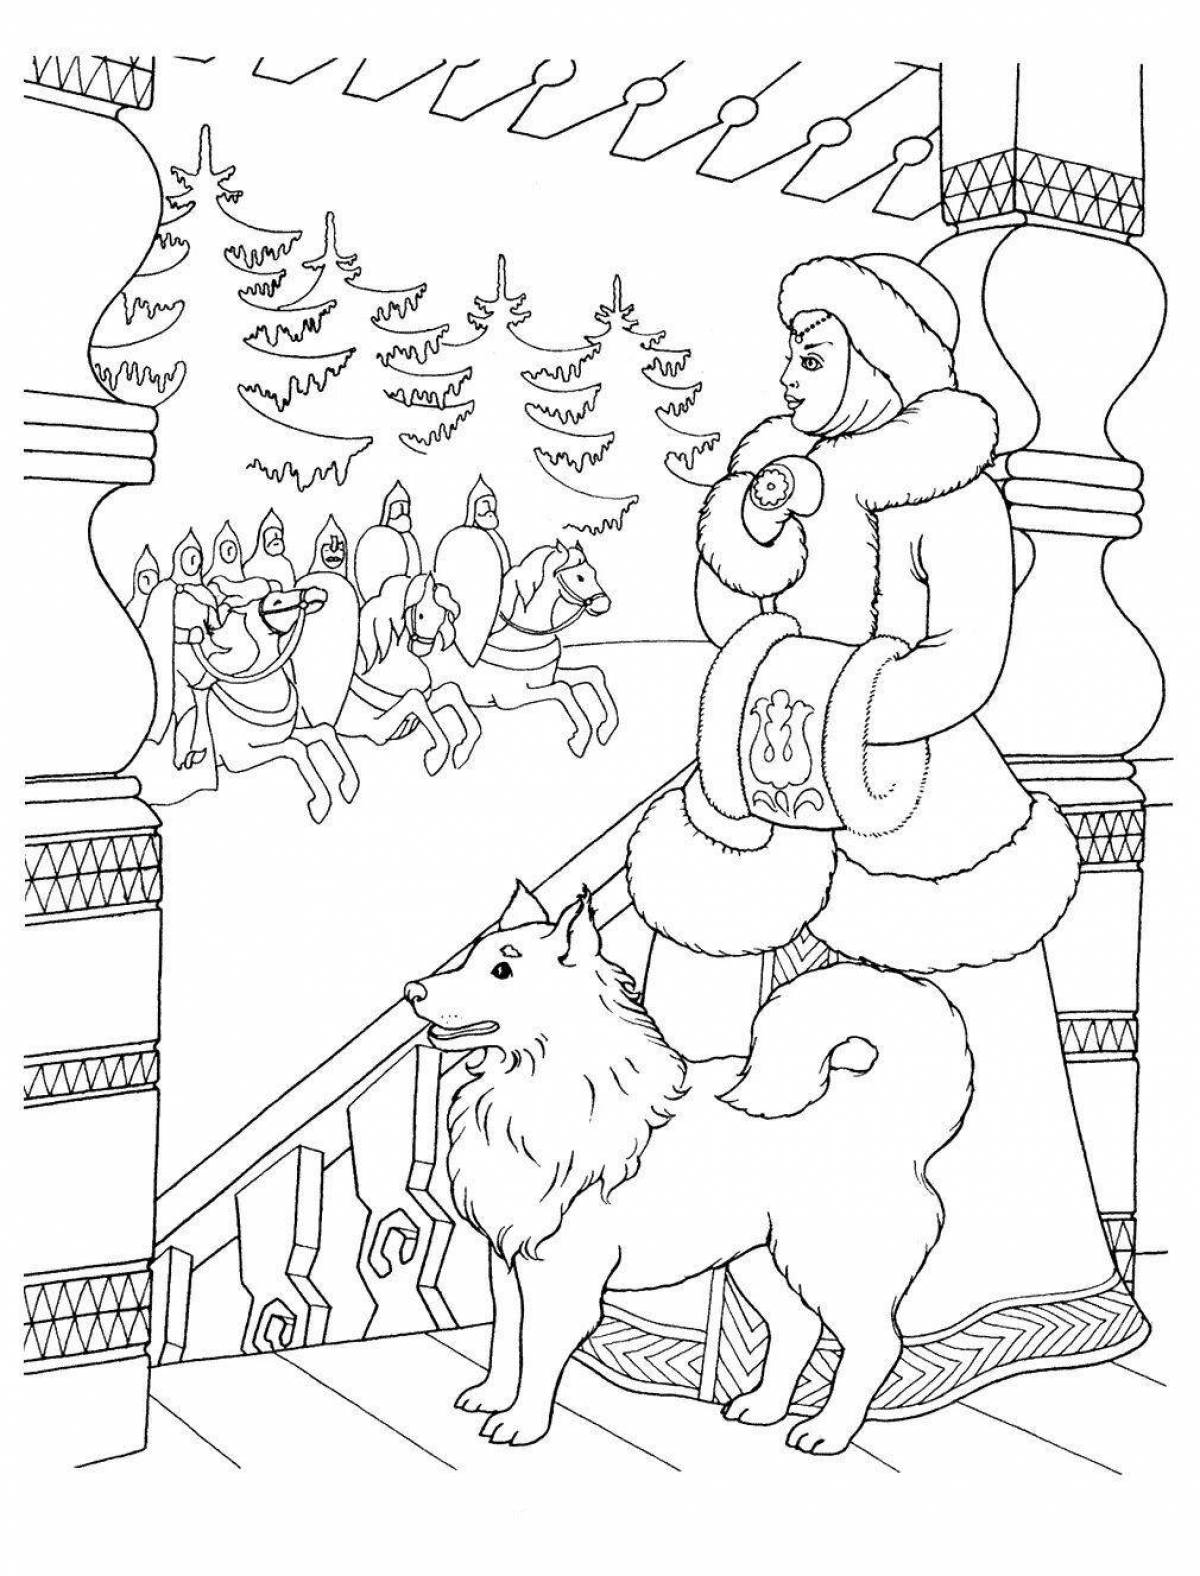 A fascinating coloring book for children aged 4-5 based on Pushkin's fairy tales